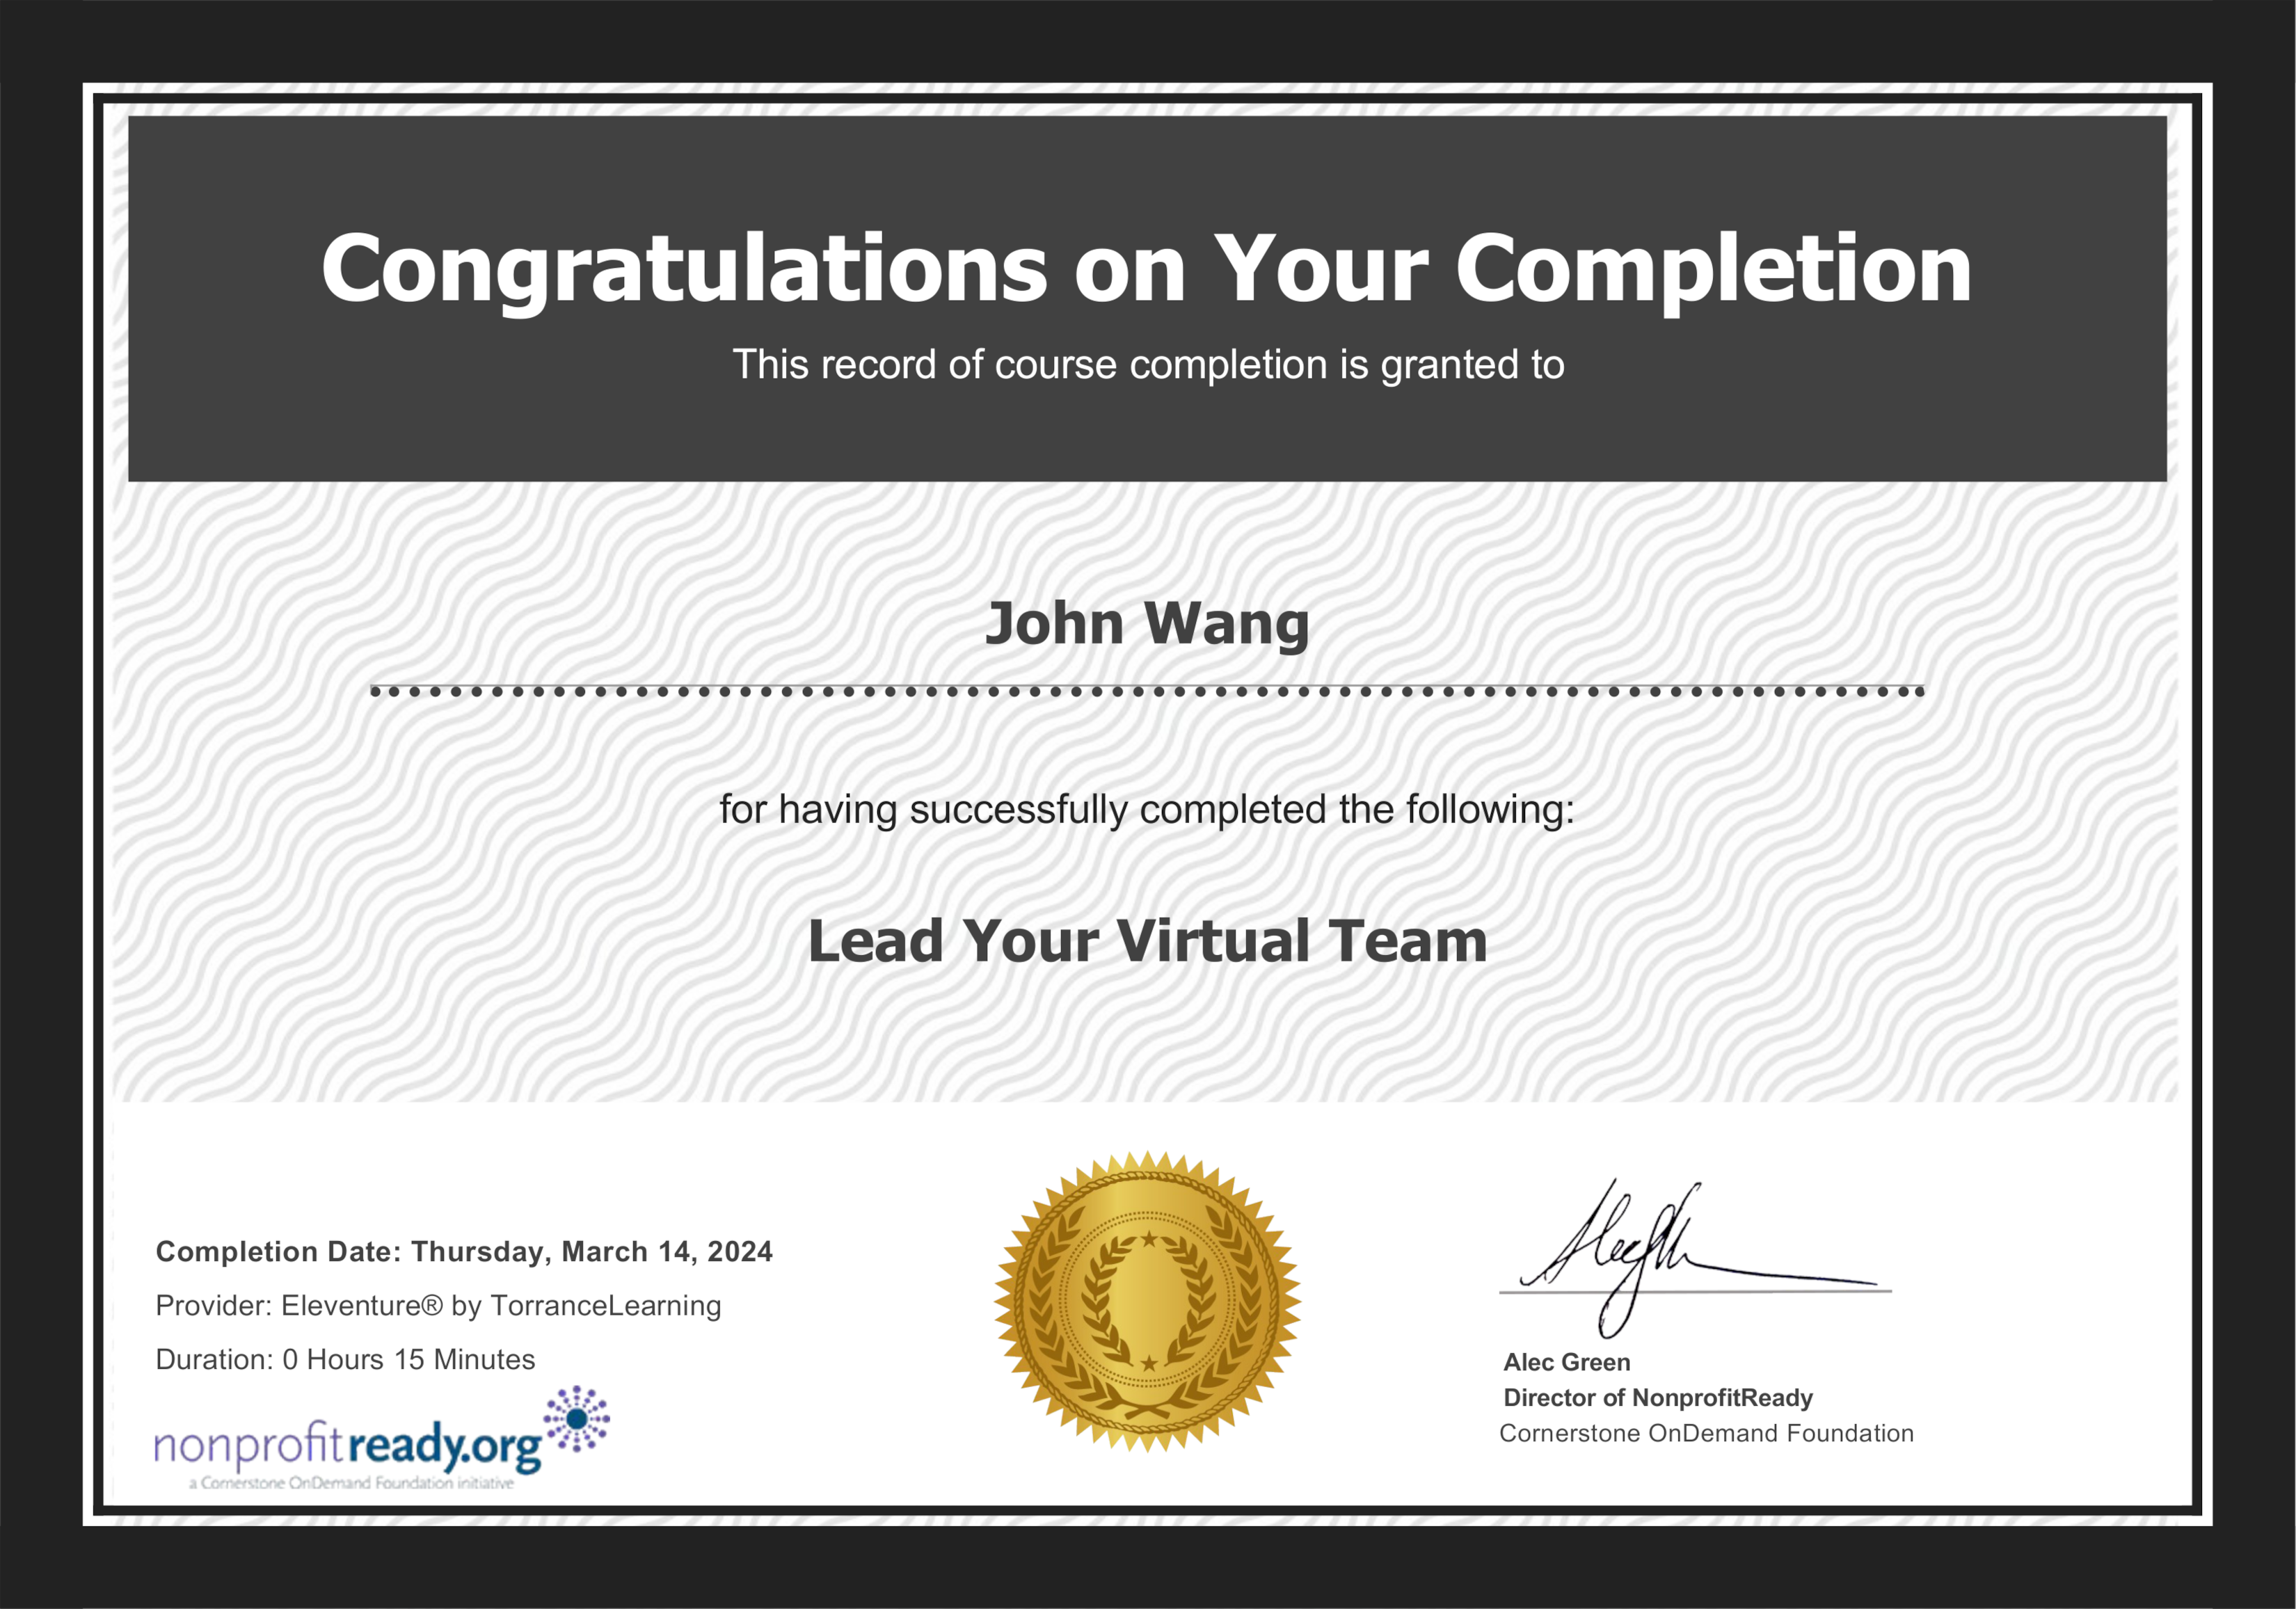 John's Lead Your Virtual Team from Eleventure